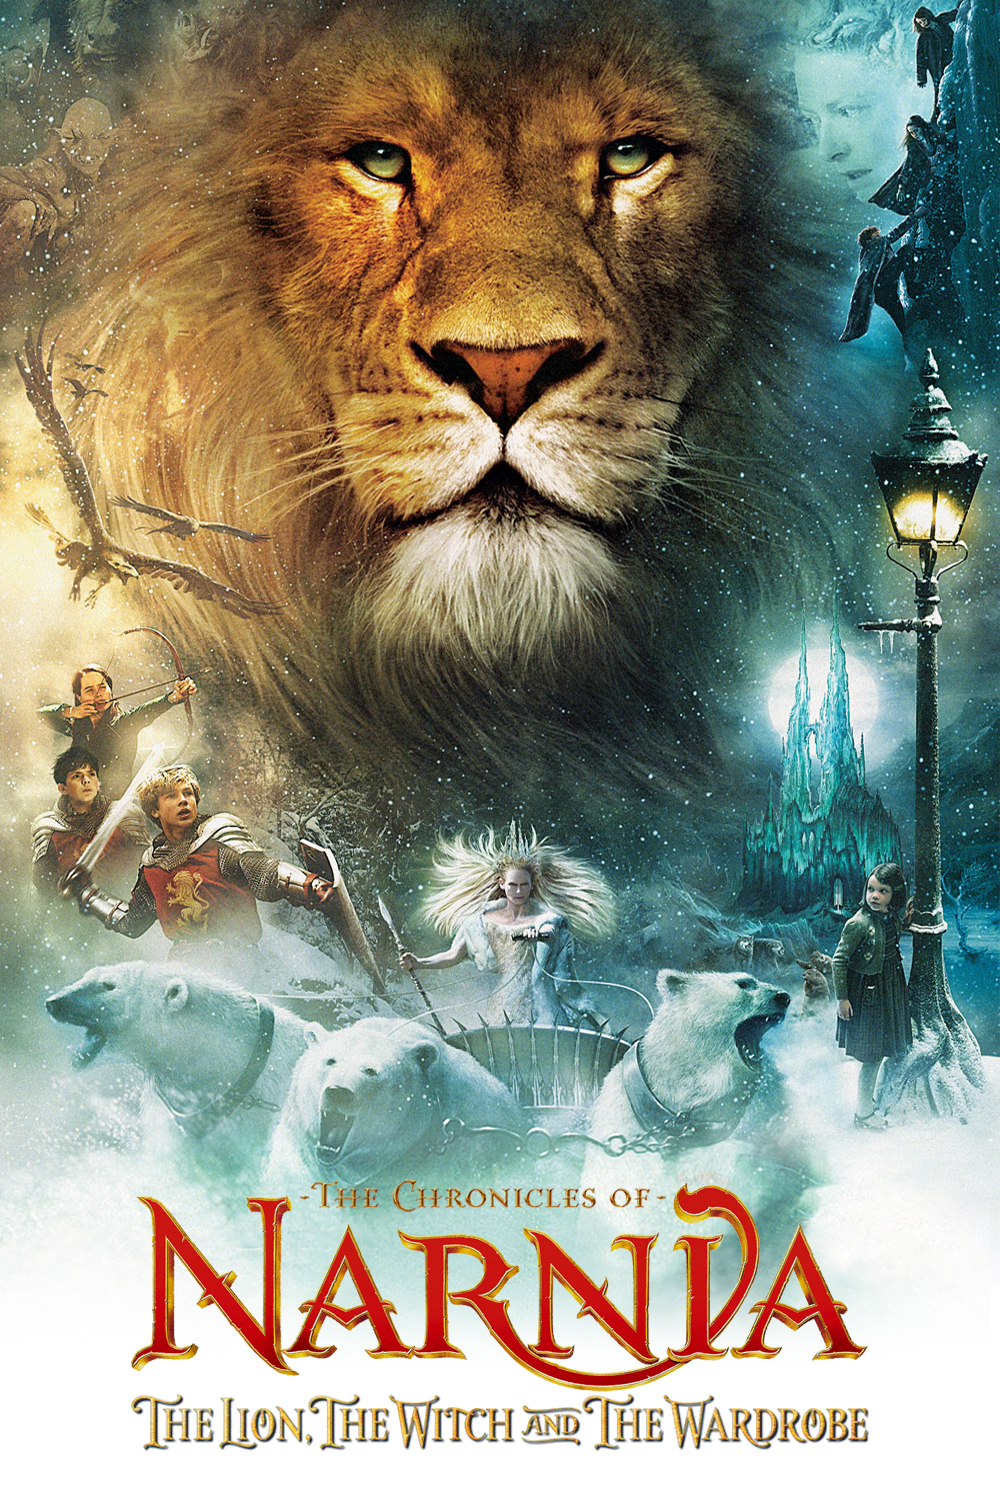 Nonton Film The Chronicles of Narnia: The Lion, the Witch and the